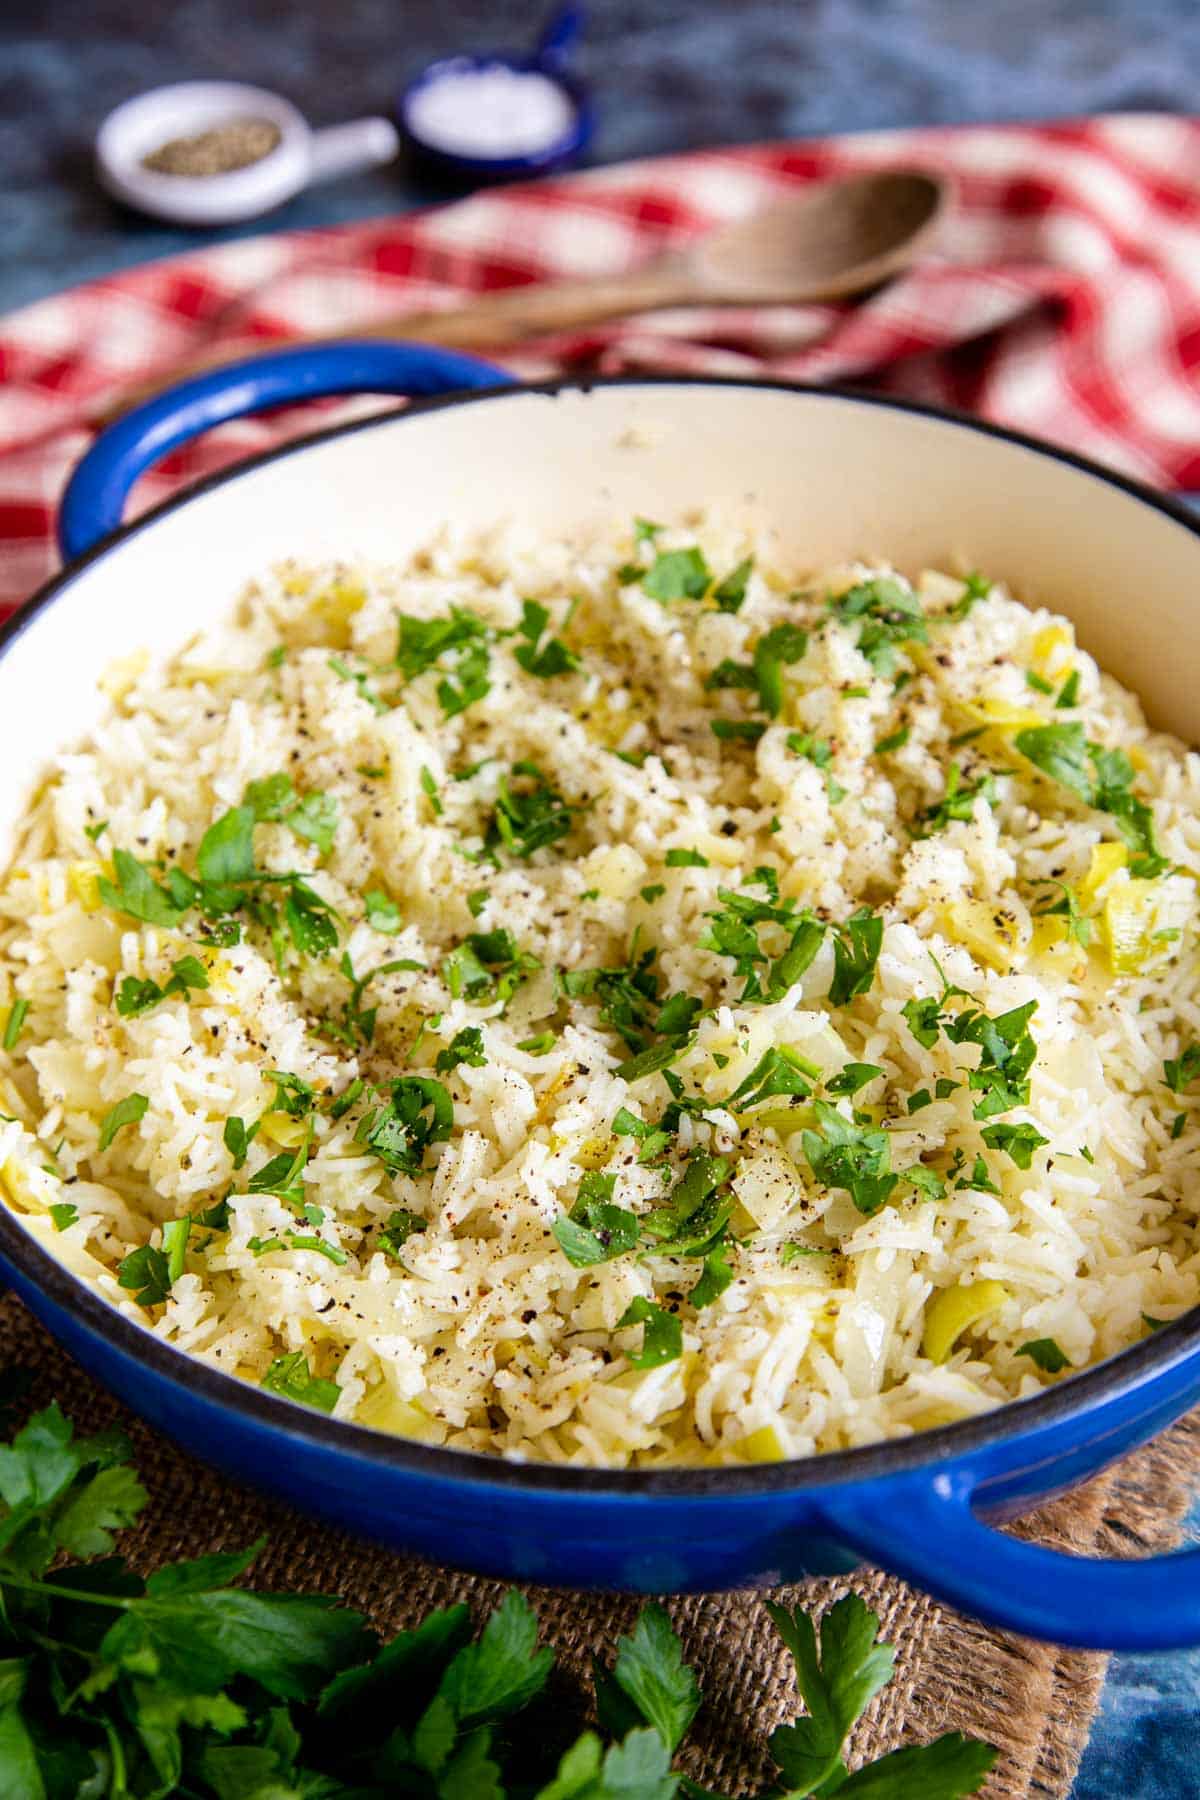 Tender leek rice served with a scattering of dark green parsley in a blue and white casserole dish against a red gingham cloth.